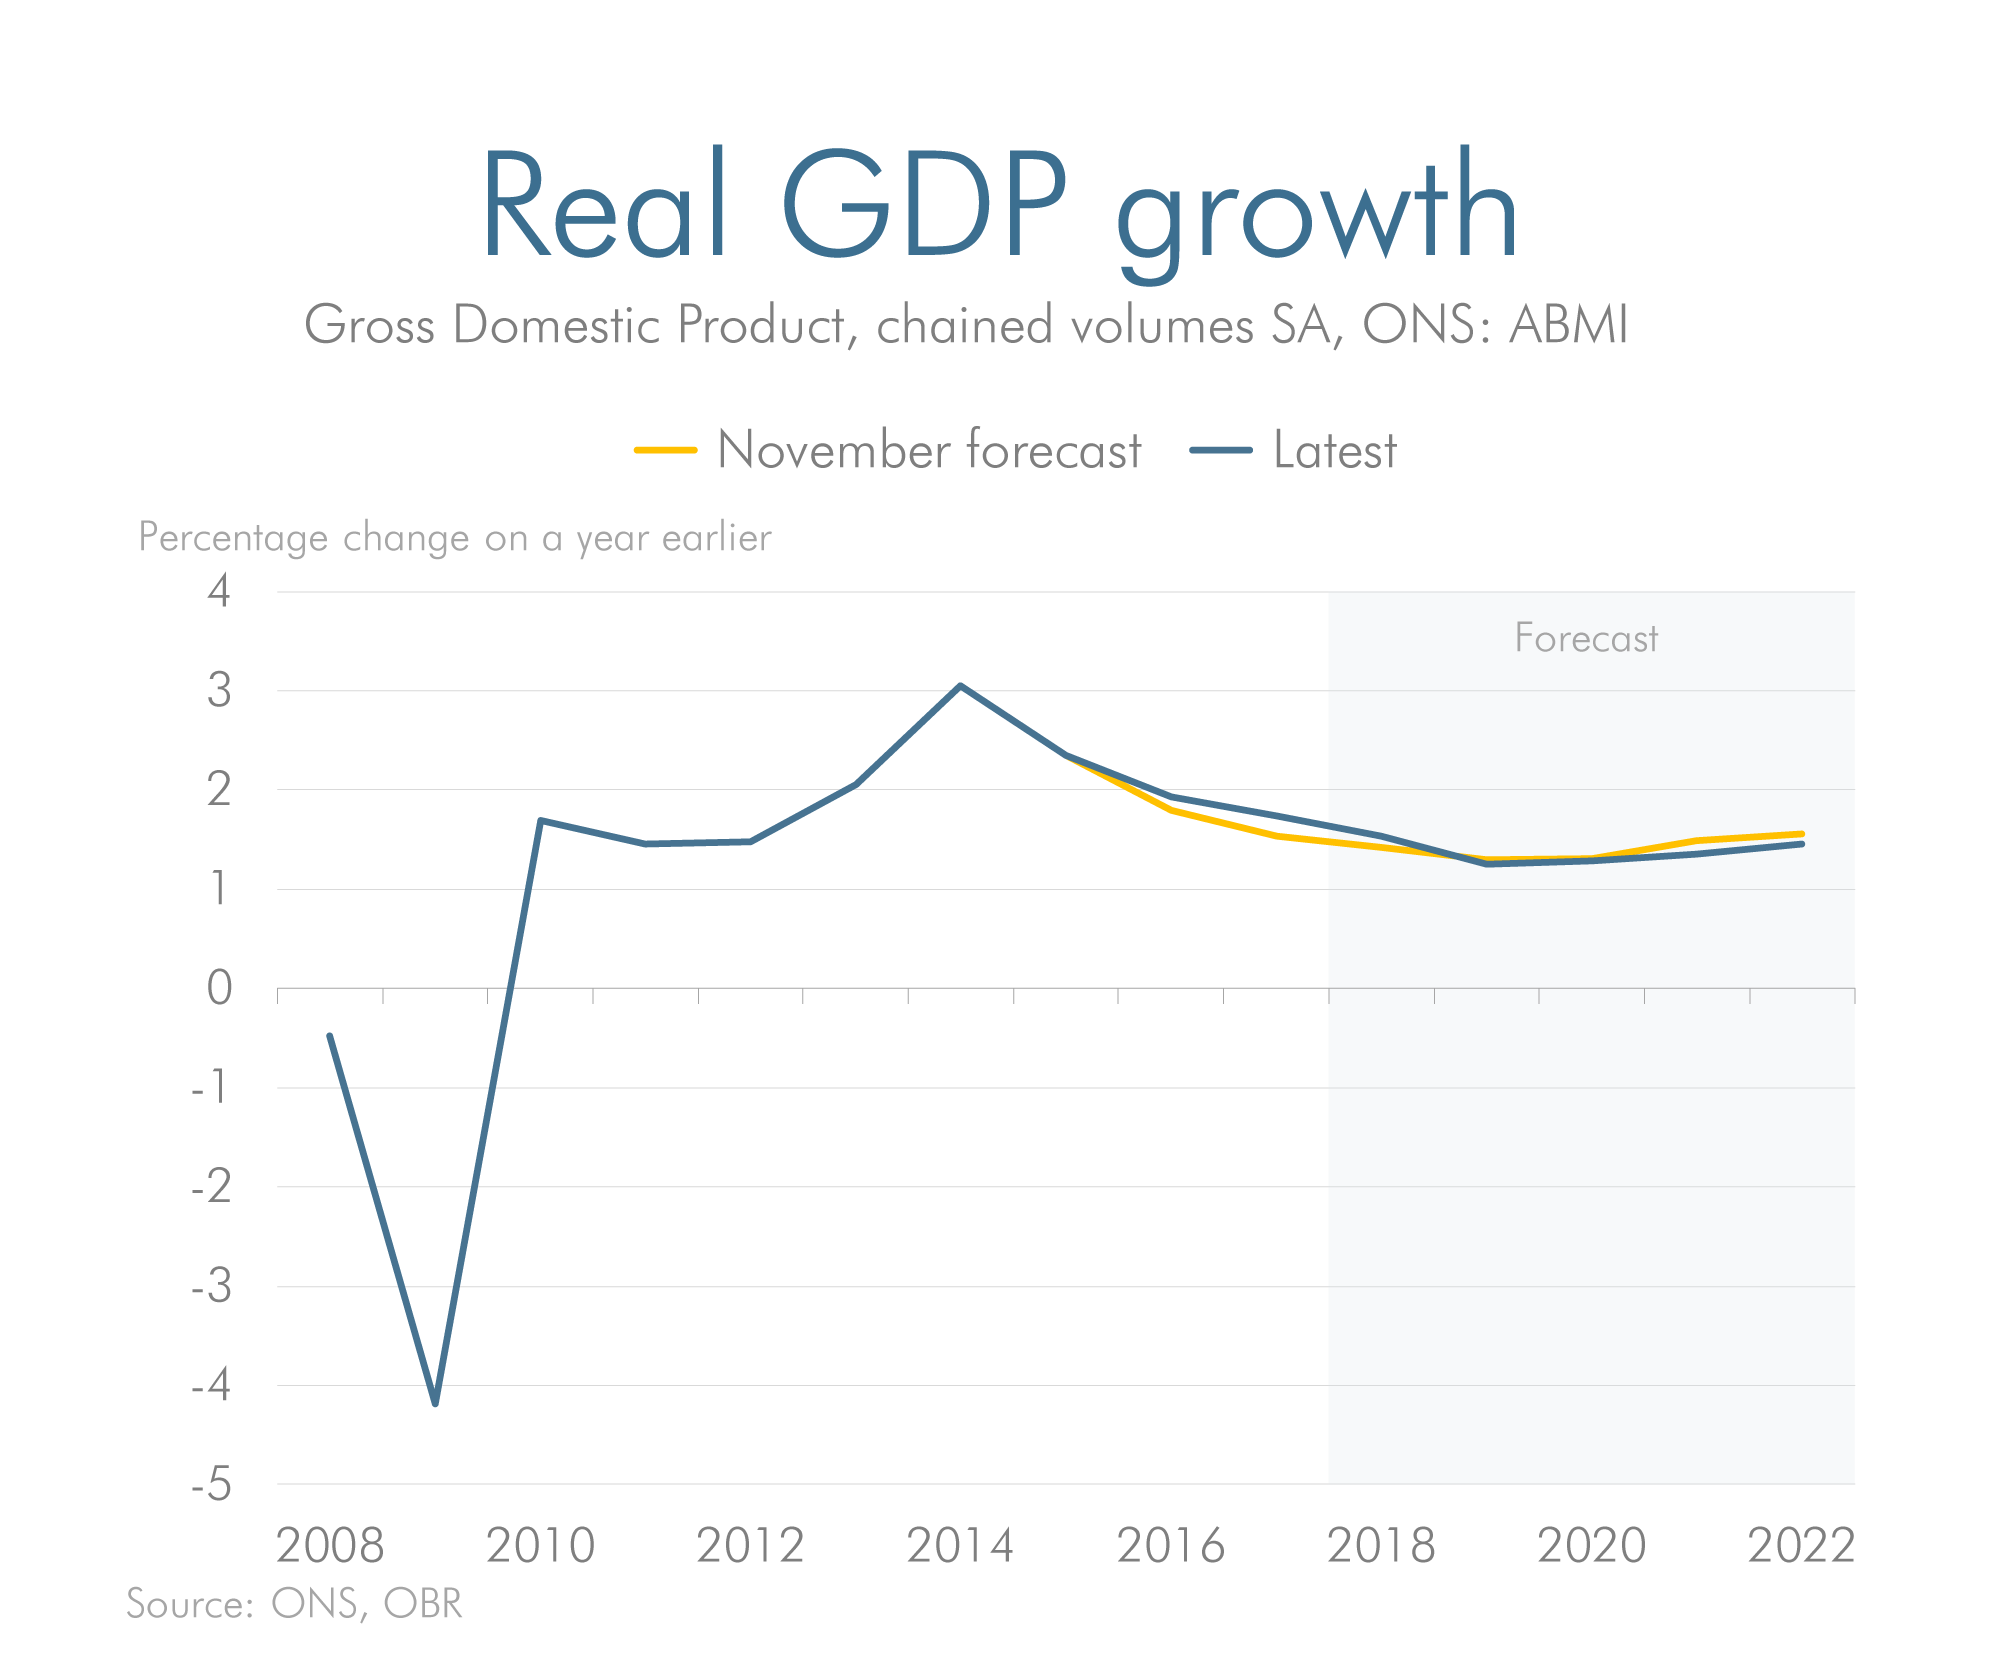 Latest forecast versus previous forecast for real GDP growth